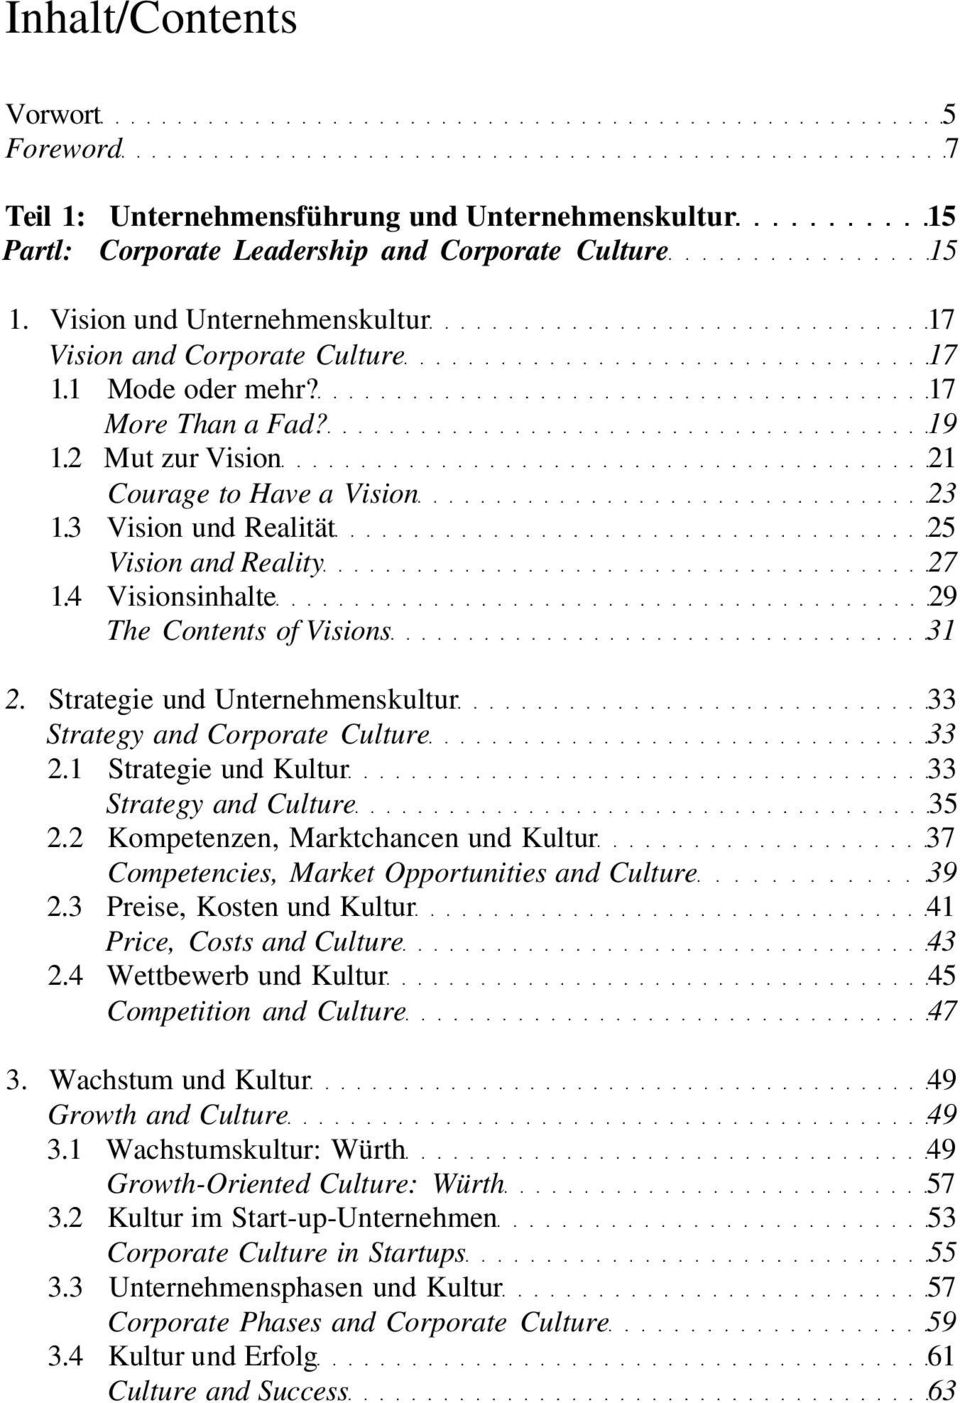 3 Vision und Realität 25 Vision and Reality 27 1.4 Visionsinhalte 29 The Contents of Visions 31 2. Strategie und Unternehmenskultur 33 Strategy and Corporate Culture 33 2.